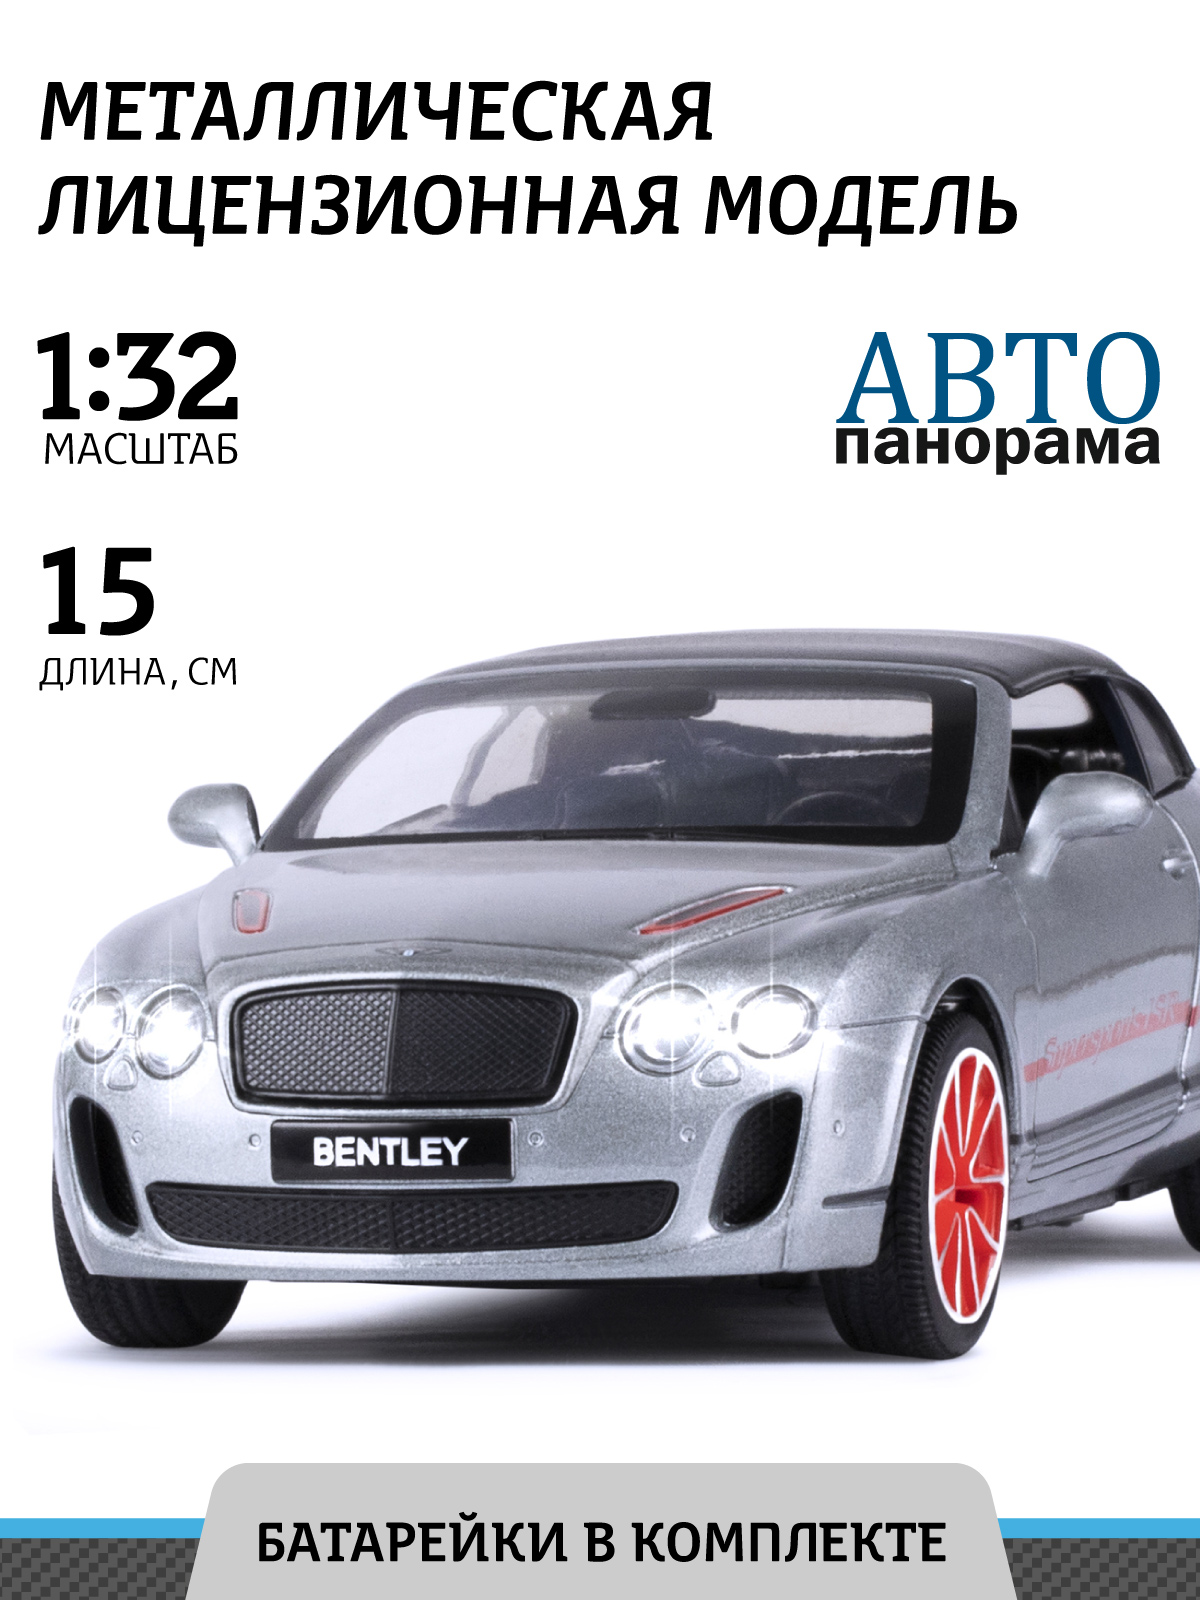 Машинка Автопанорама М1:32, Bentley Continental Supersports ISR серебряный, JB1251397 msz 1 32 bentley continental supersports alloy car model children s toy car die casting boy collection gift pull back function